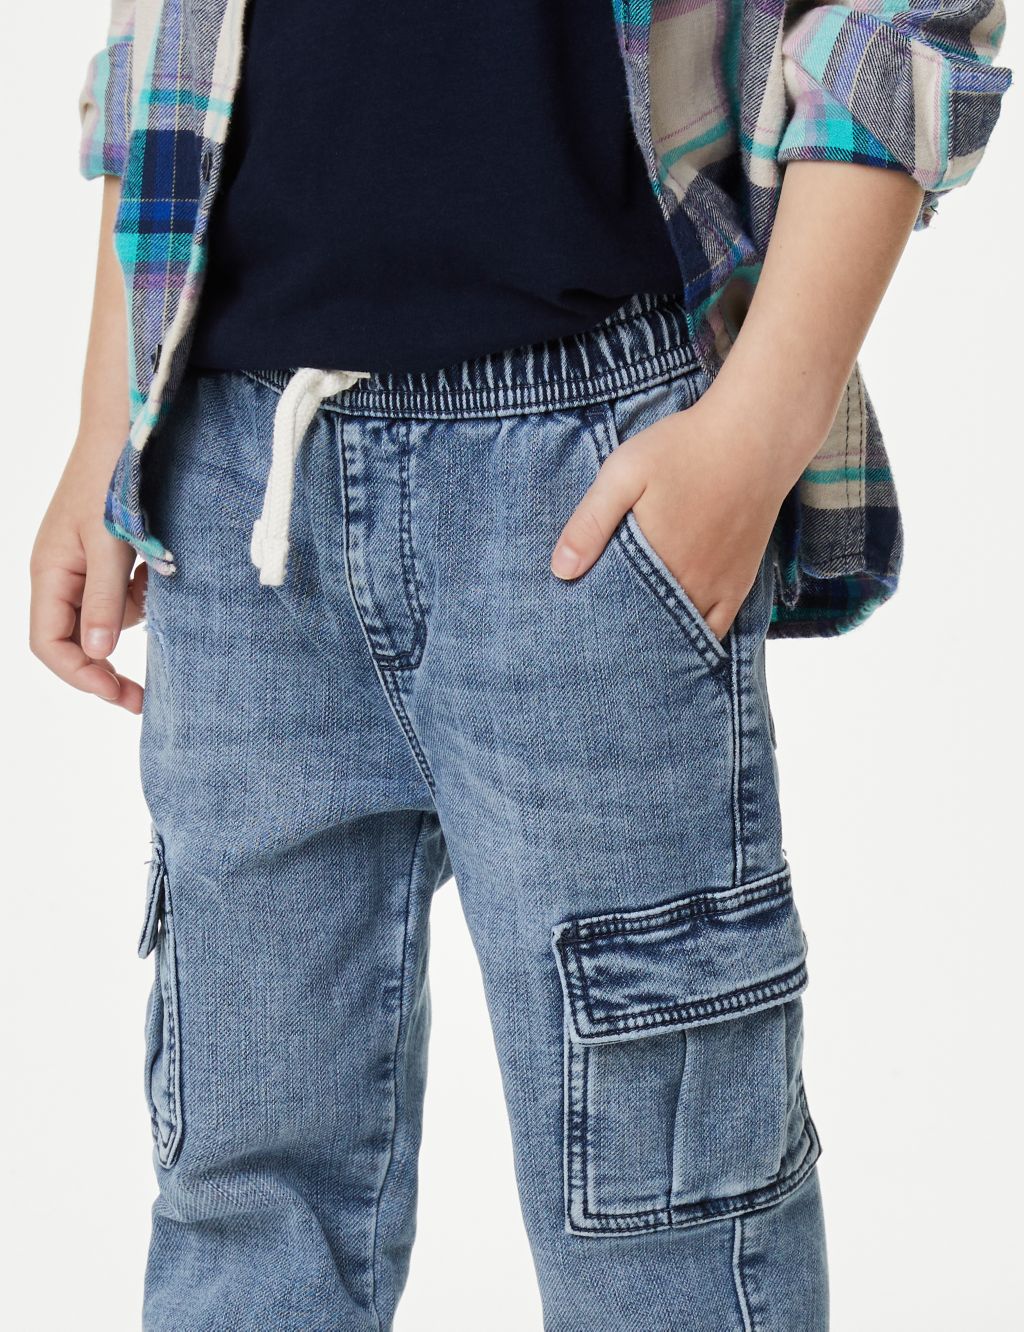 Welcome To The Denim Cargo Pant 2.0